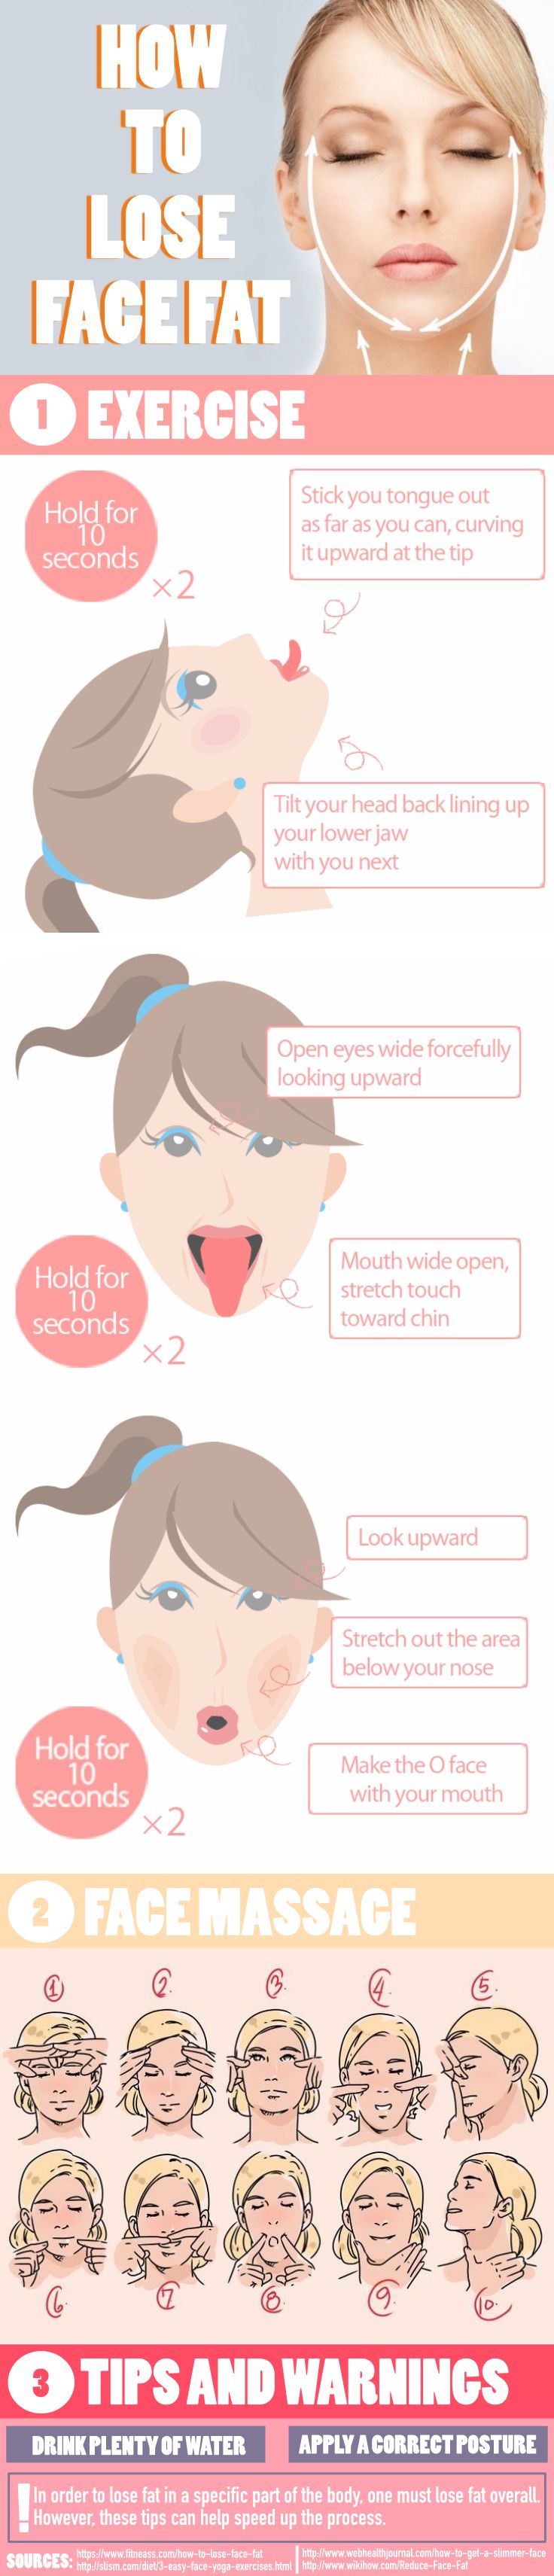 Lose Face Fat Infographic